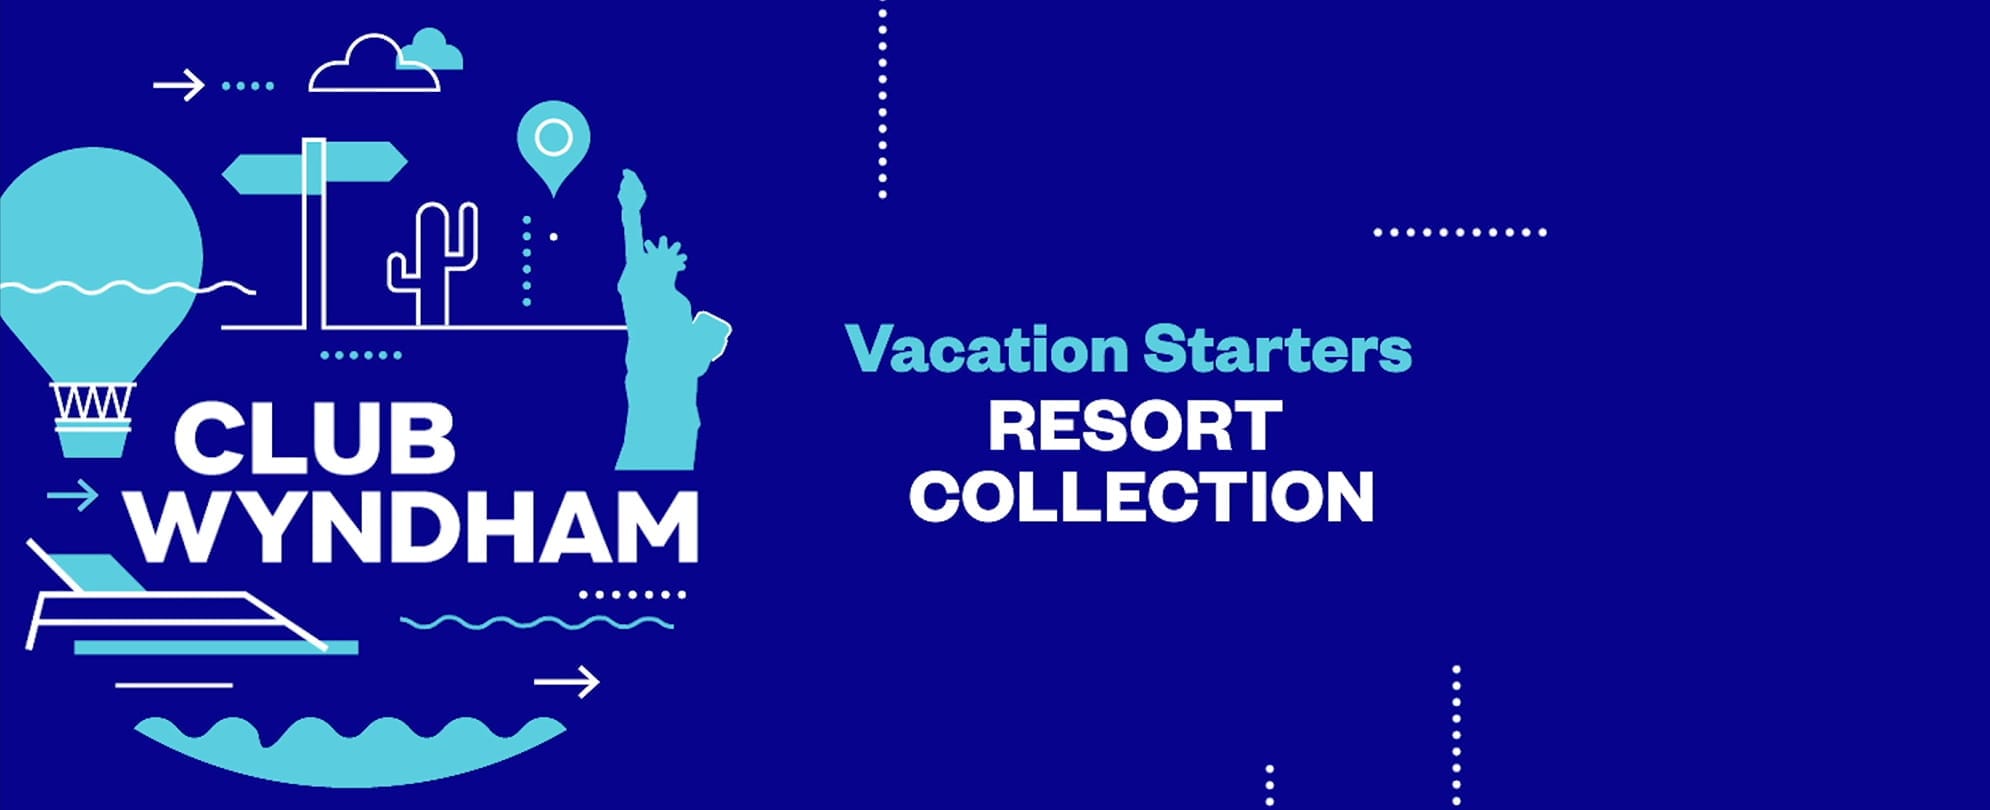 Resort Collection overview from the Club Wyndham Vacation Starters video series